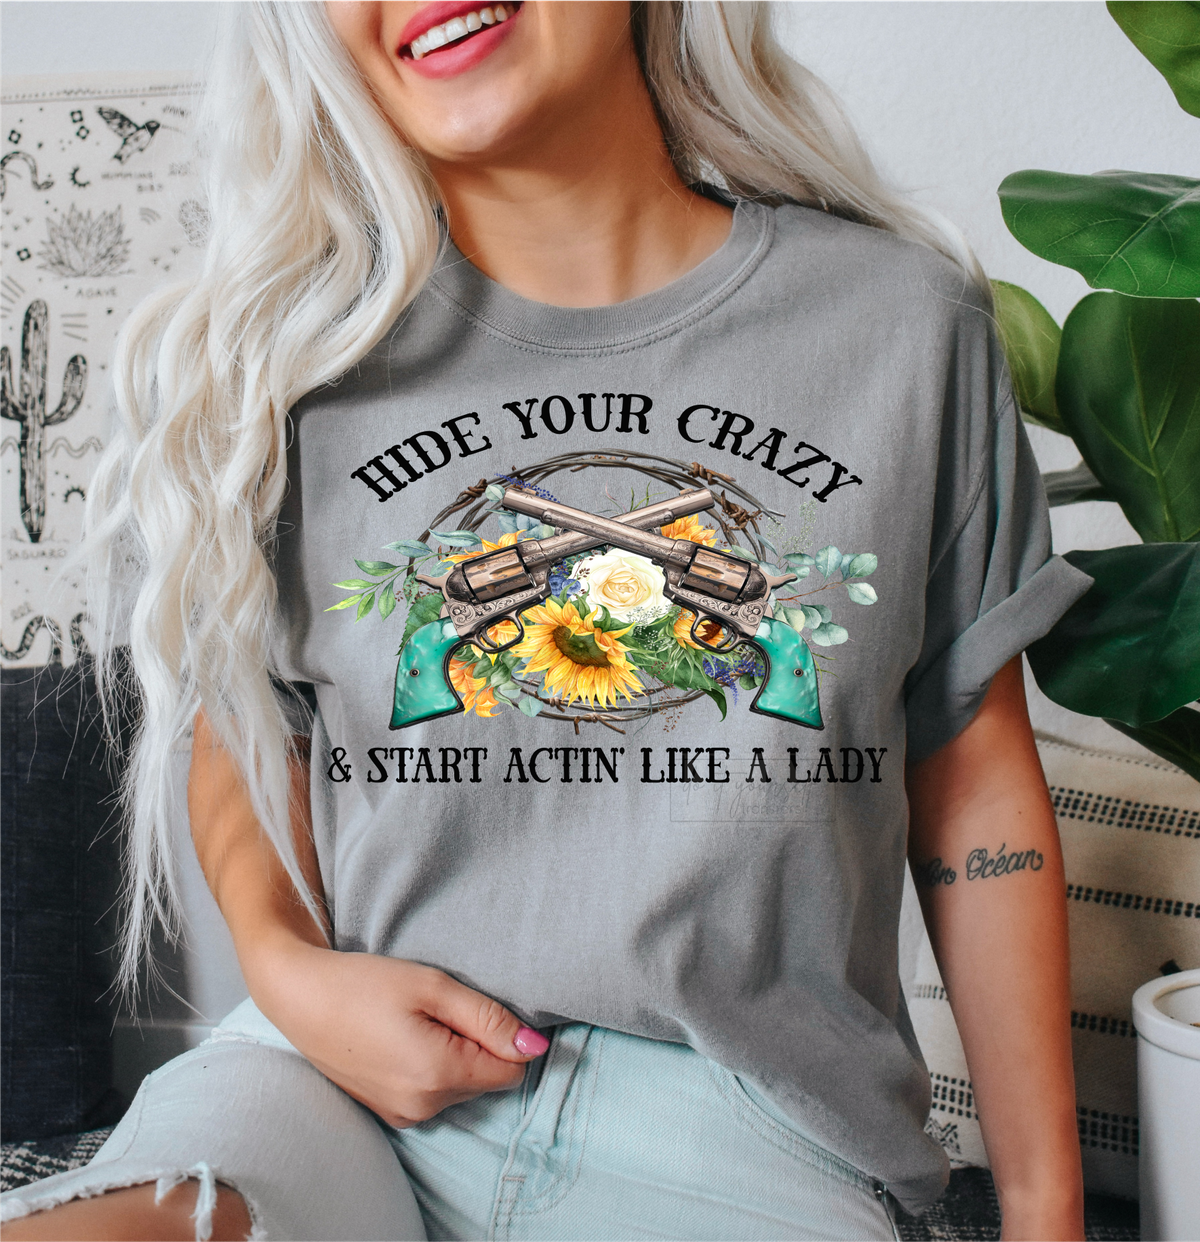 Hide your crazy and start actin' like a lady pistols flowers  size ADULT  DTF TRANSFERPRINT TO ORDER